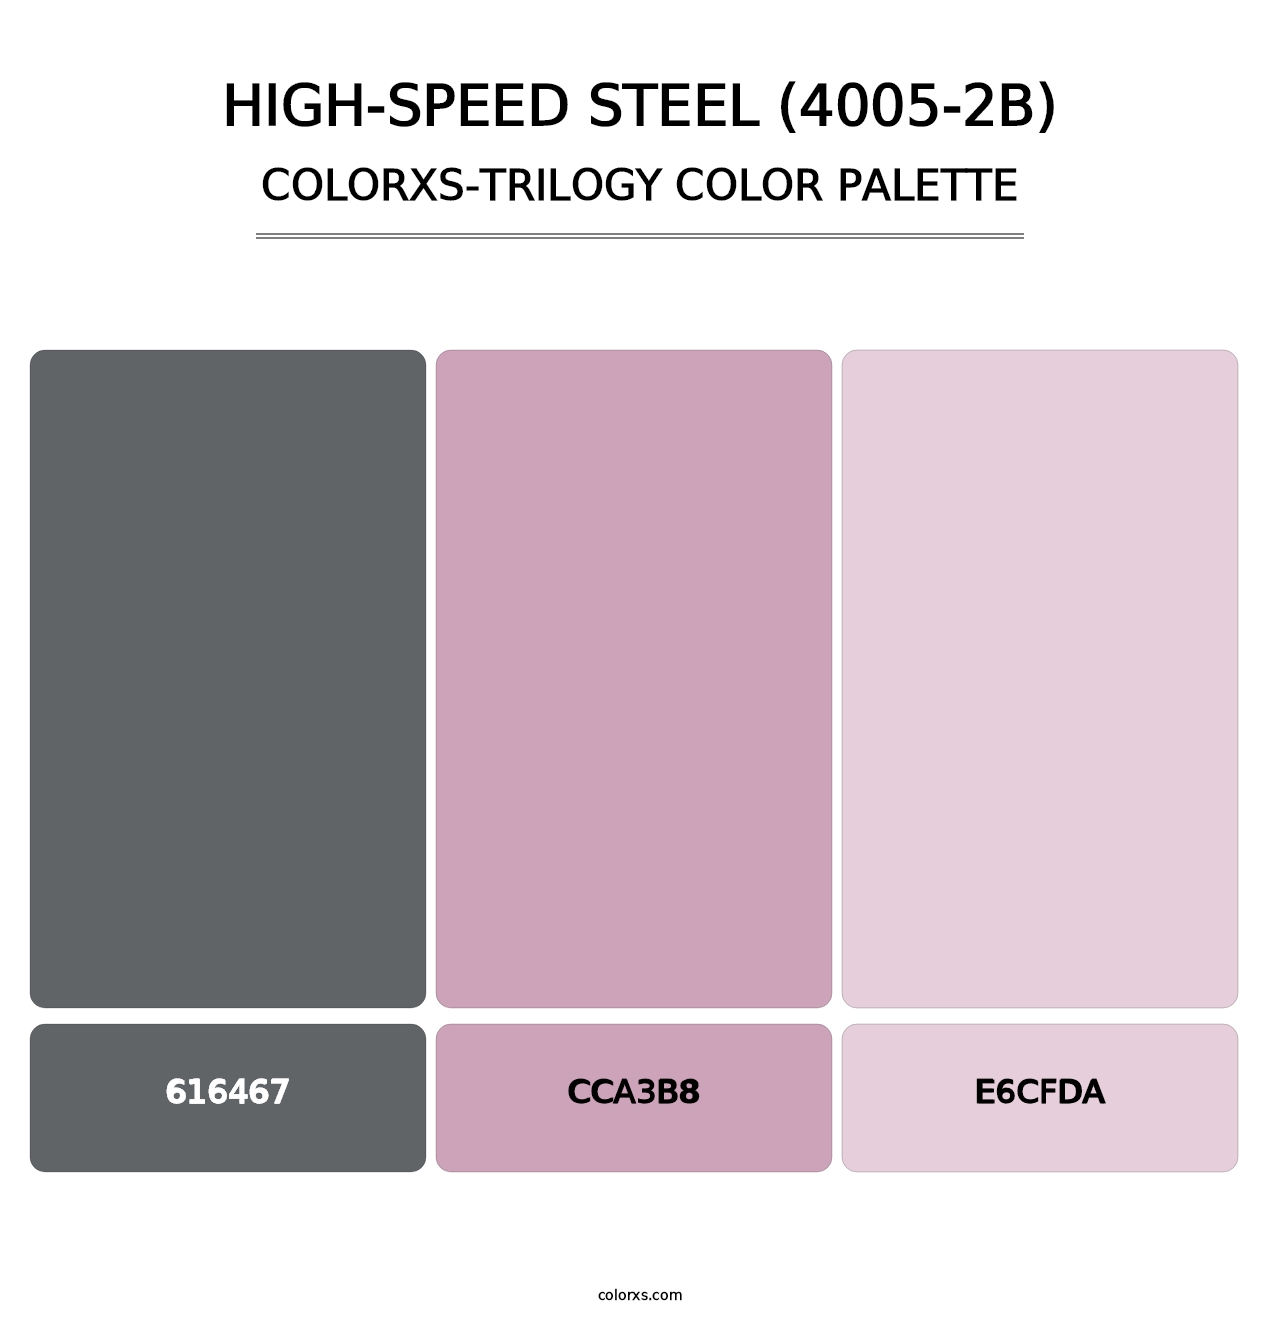 High-Speed Steel (4005-2B) - Colorxs Trilogy Palette